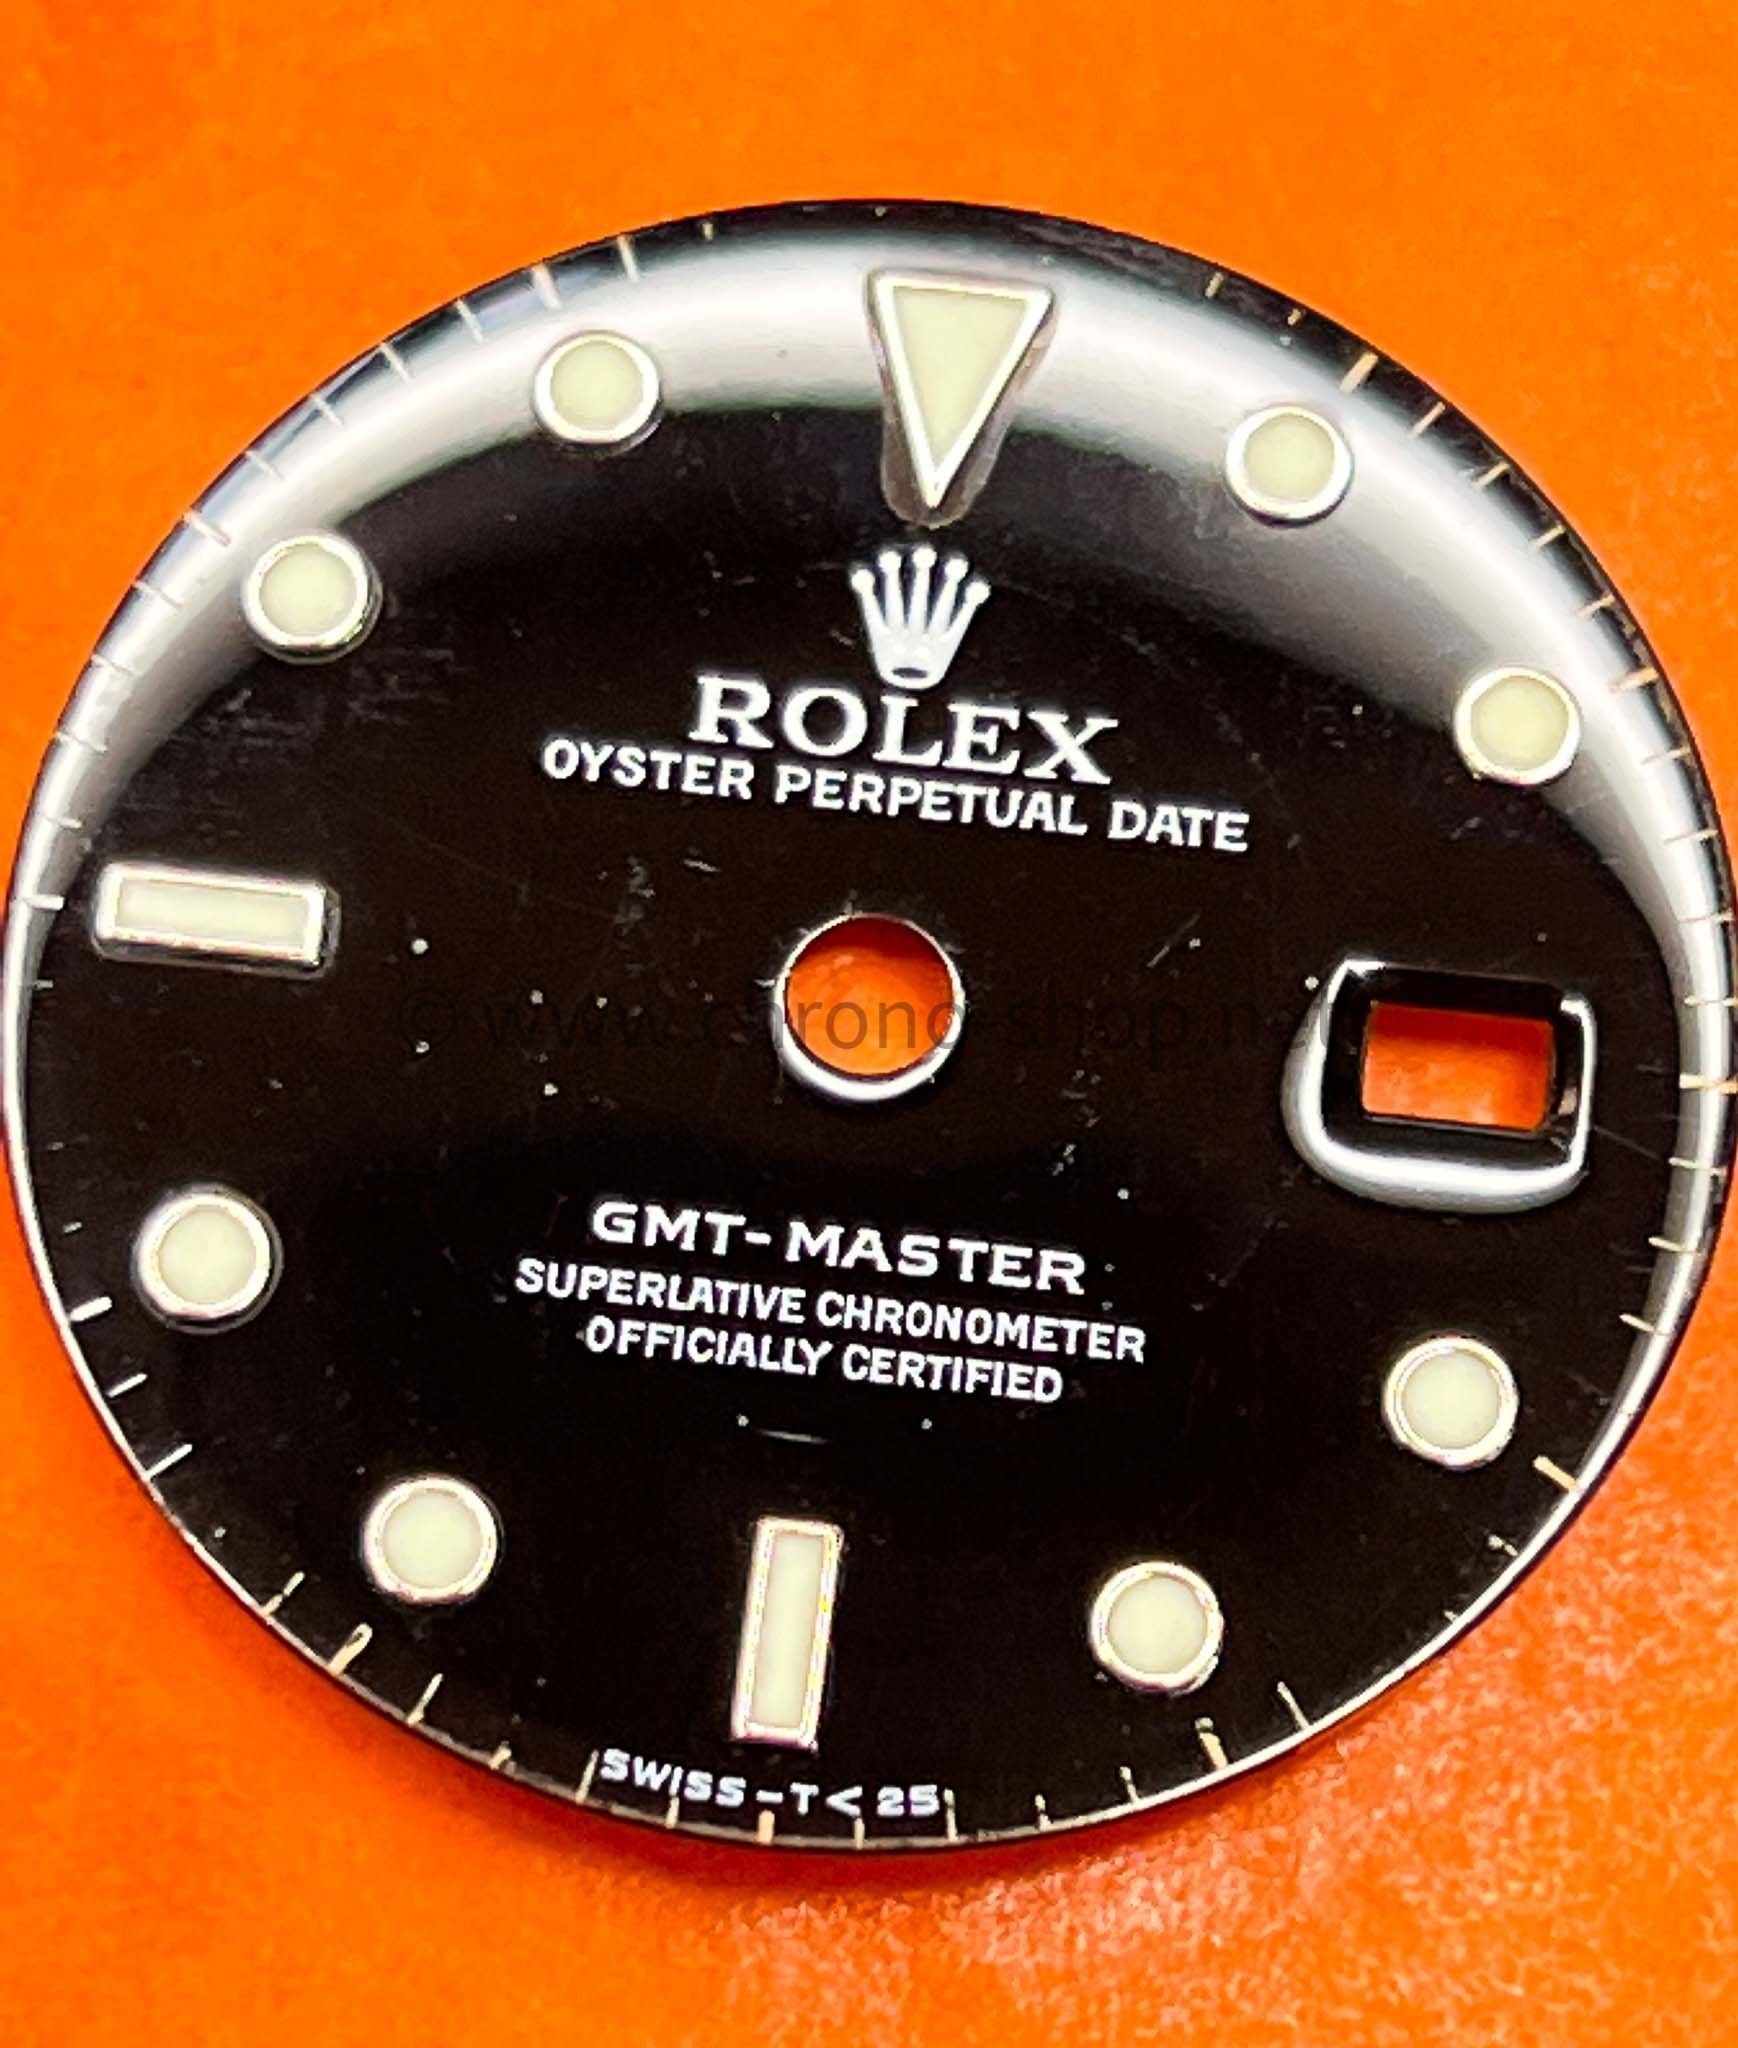 Rolex 80's Amazing Vintage GMT Master Luminova dial part 16750,16700 Cal 3075,3175 Watch Part Glossy dial